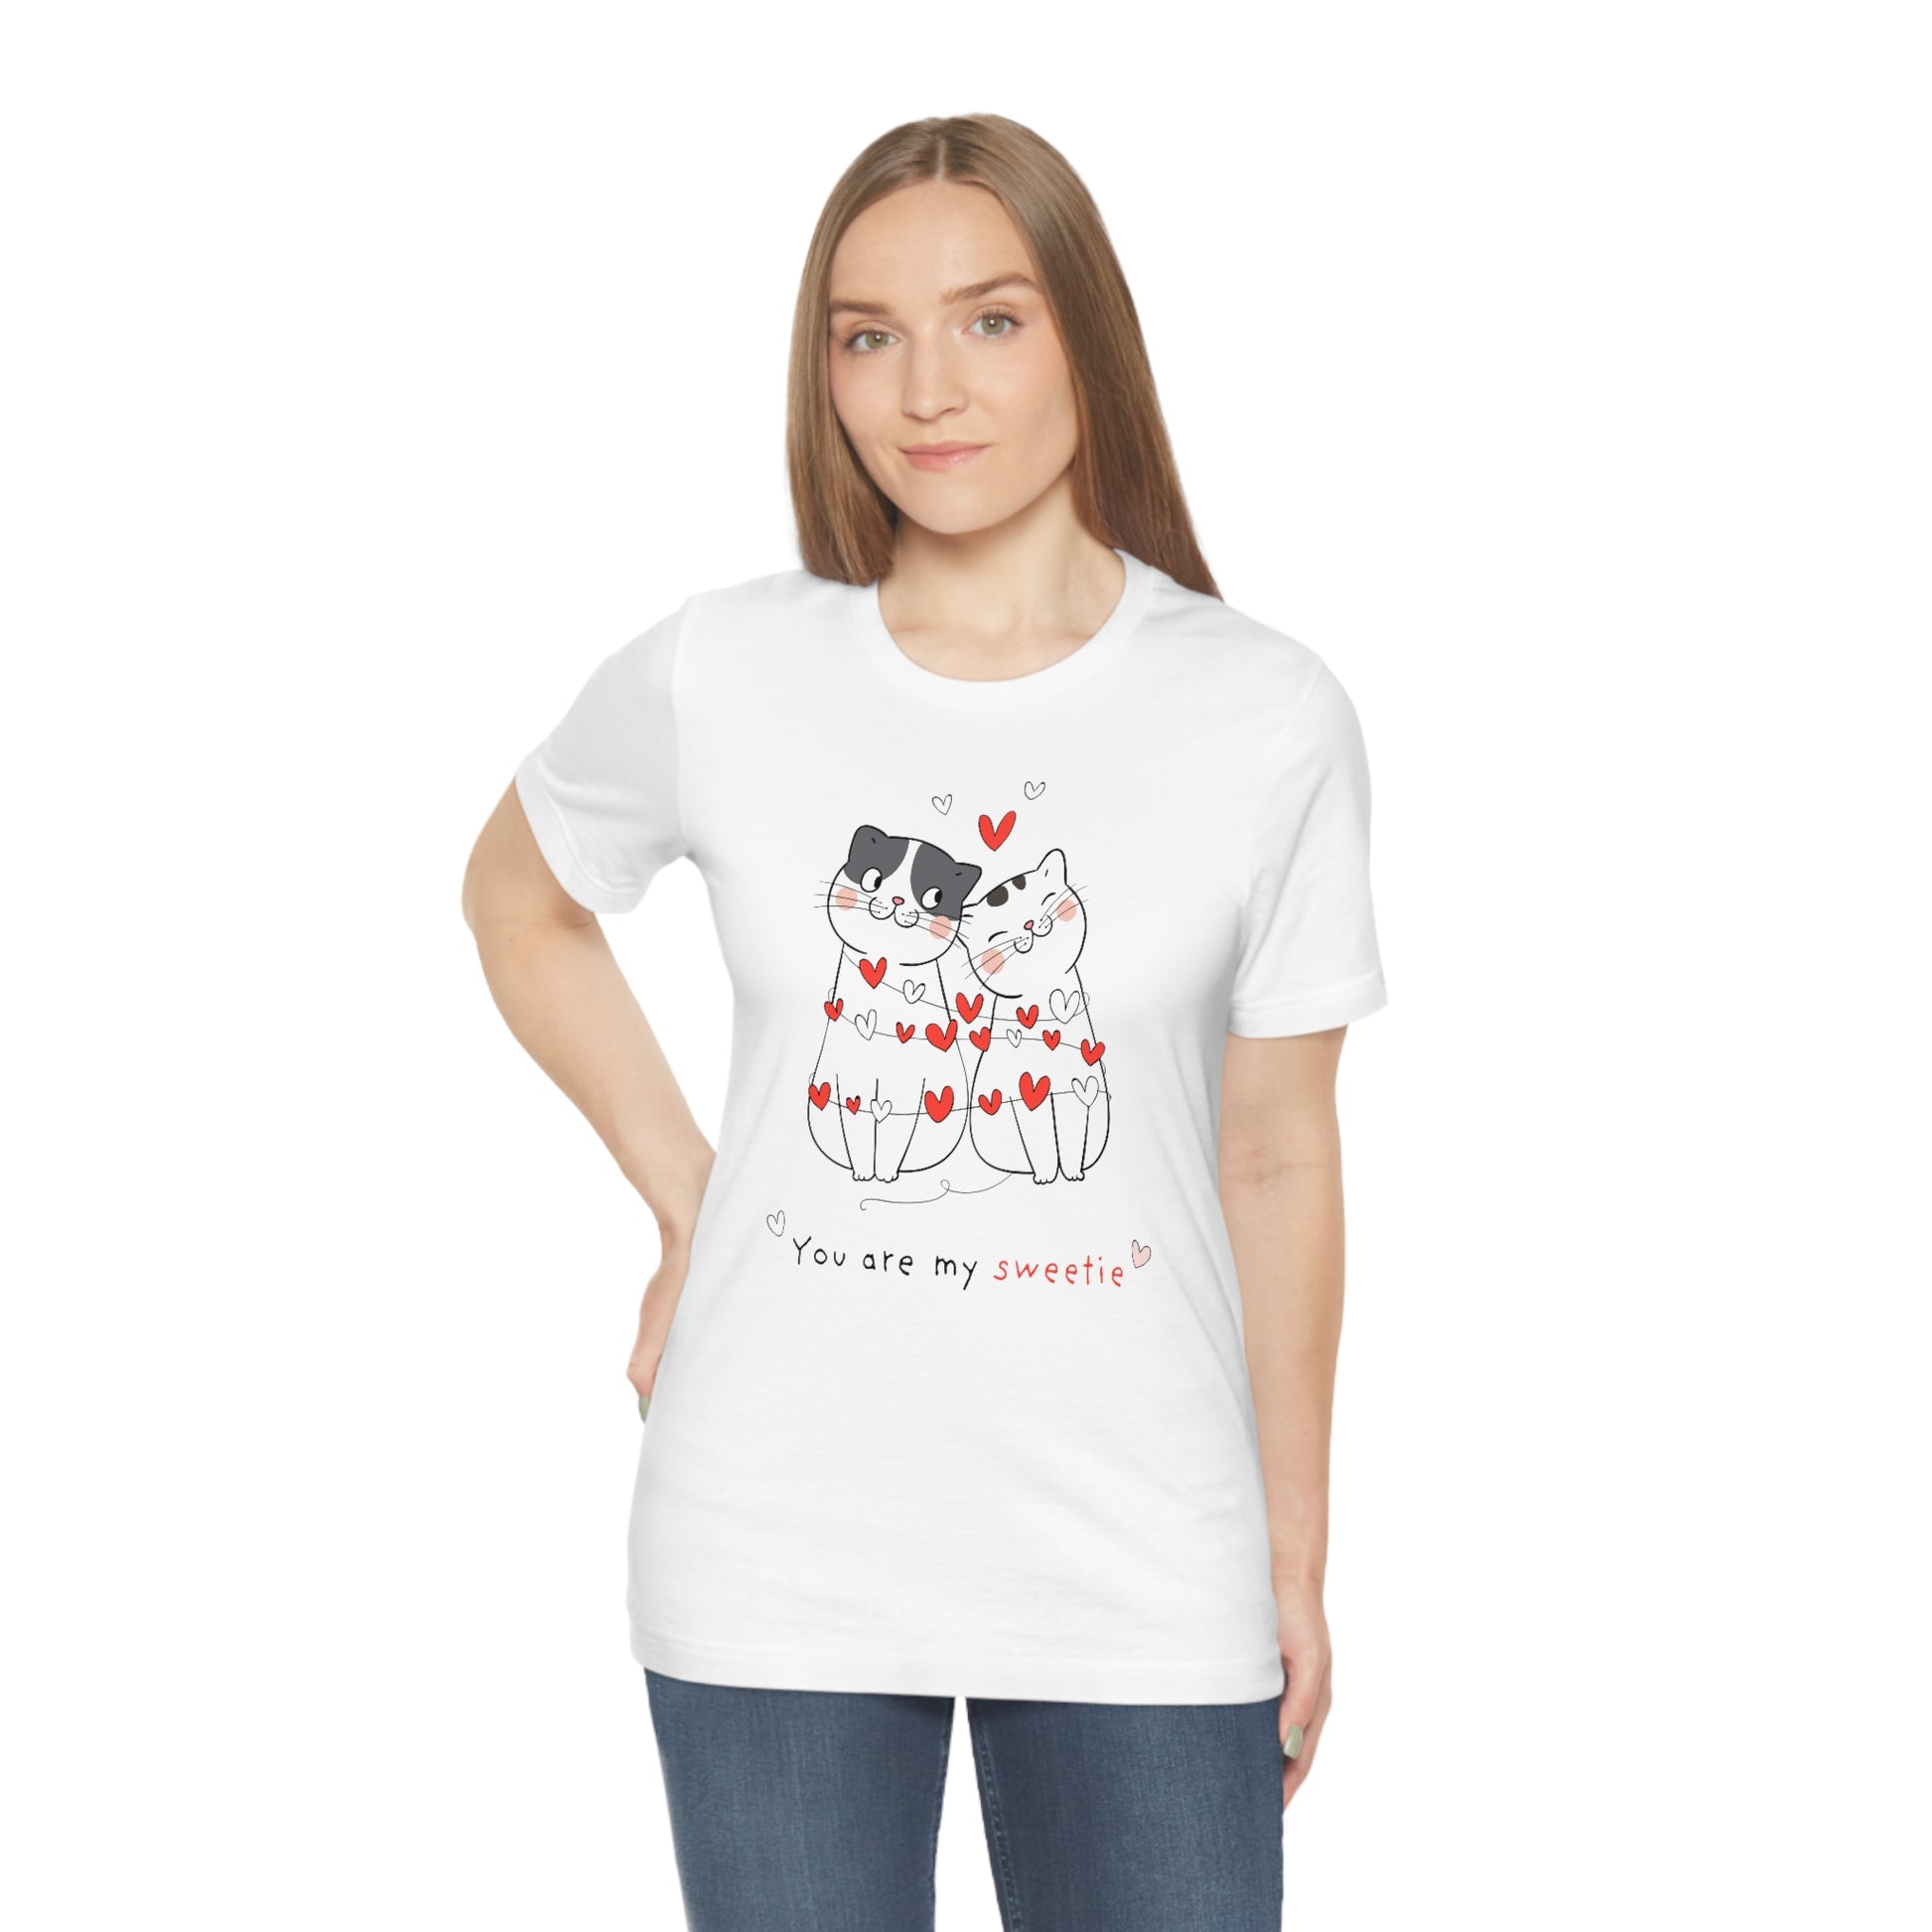 Cats Valentine's Day Tshirt, Hearts Love Sweety Kittens Unisex Women Adult Aesthetic Graphic Crewneck Tee Shirt Her Top Starcove Fashion